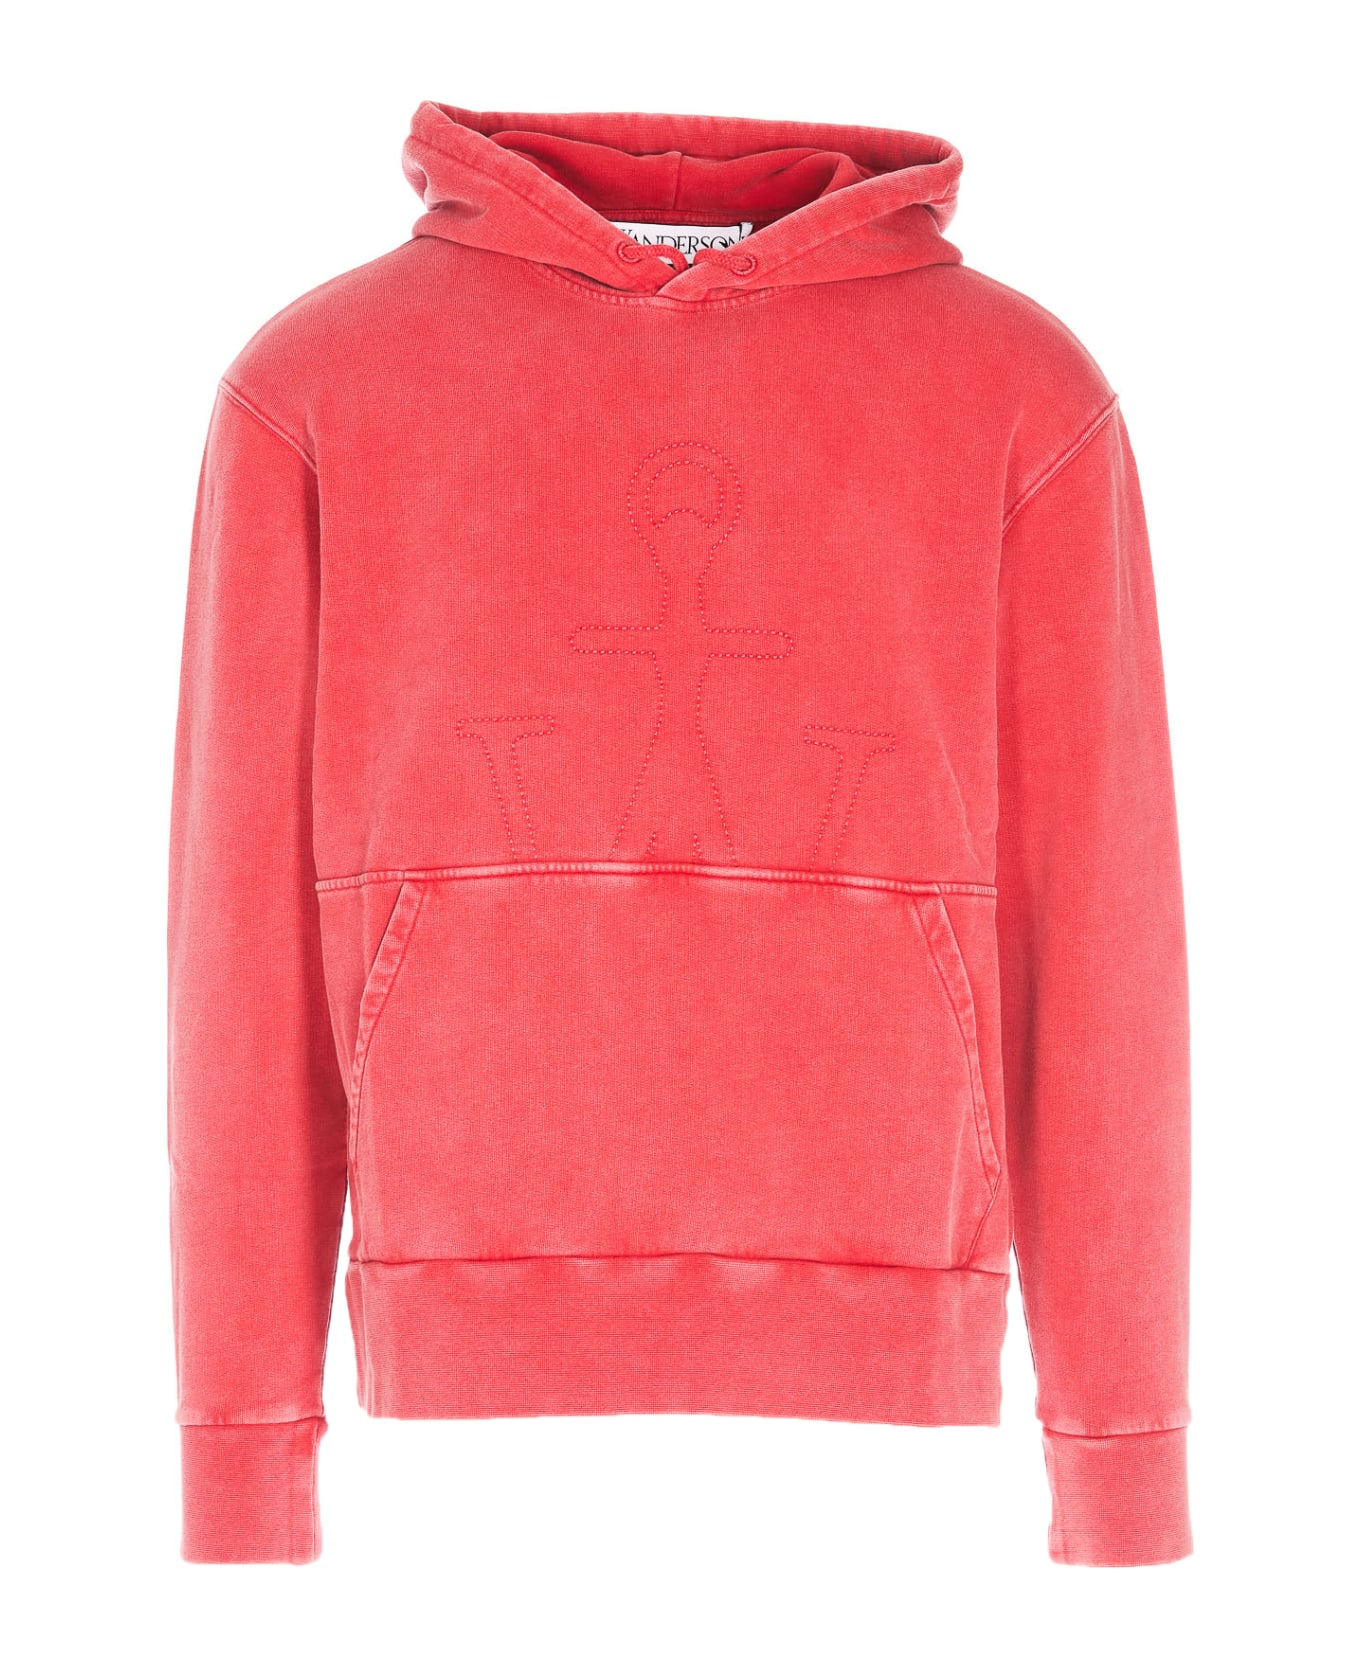 J.W. Anderson Jwa Embroidered Hoodie - RED